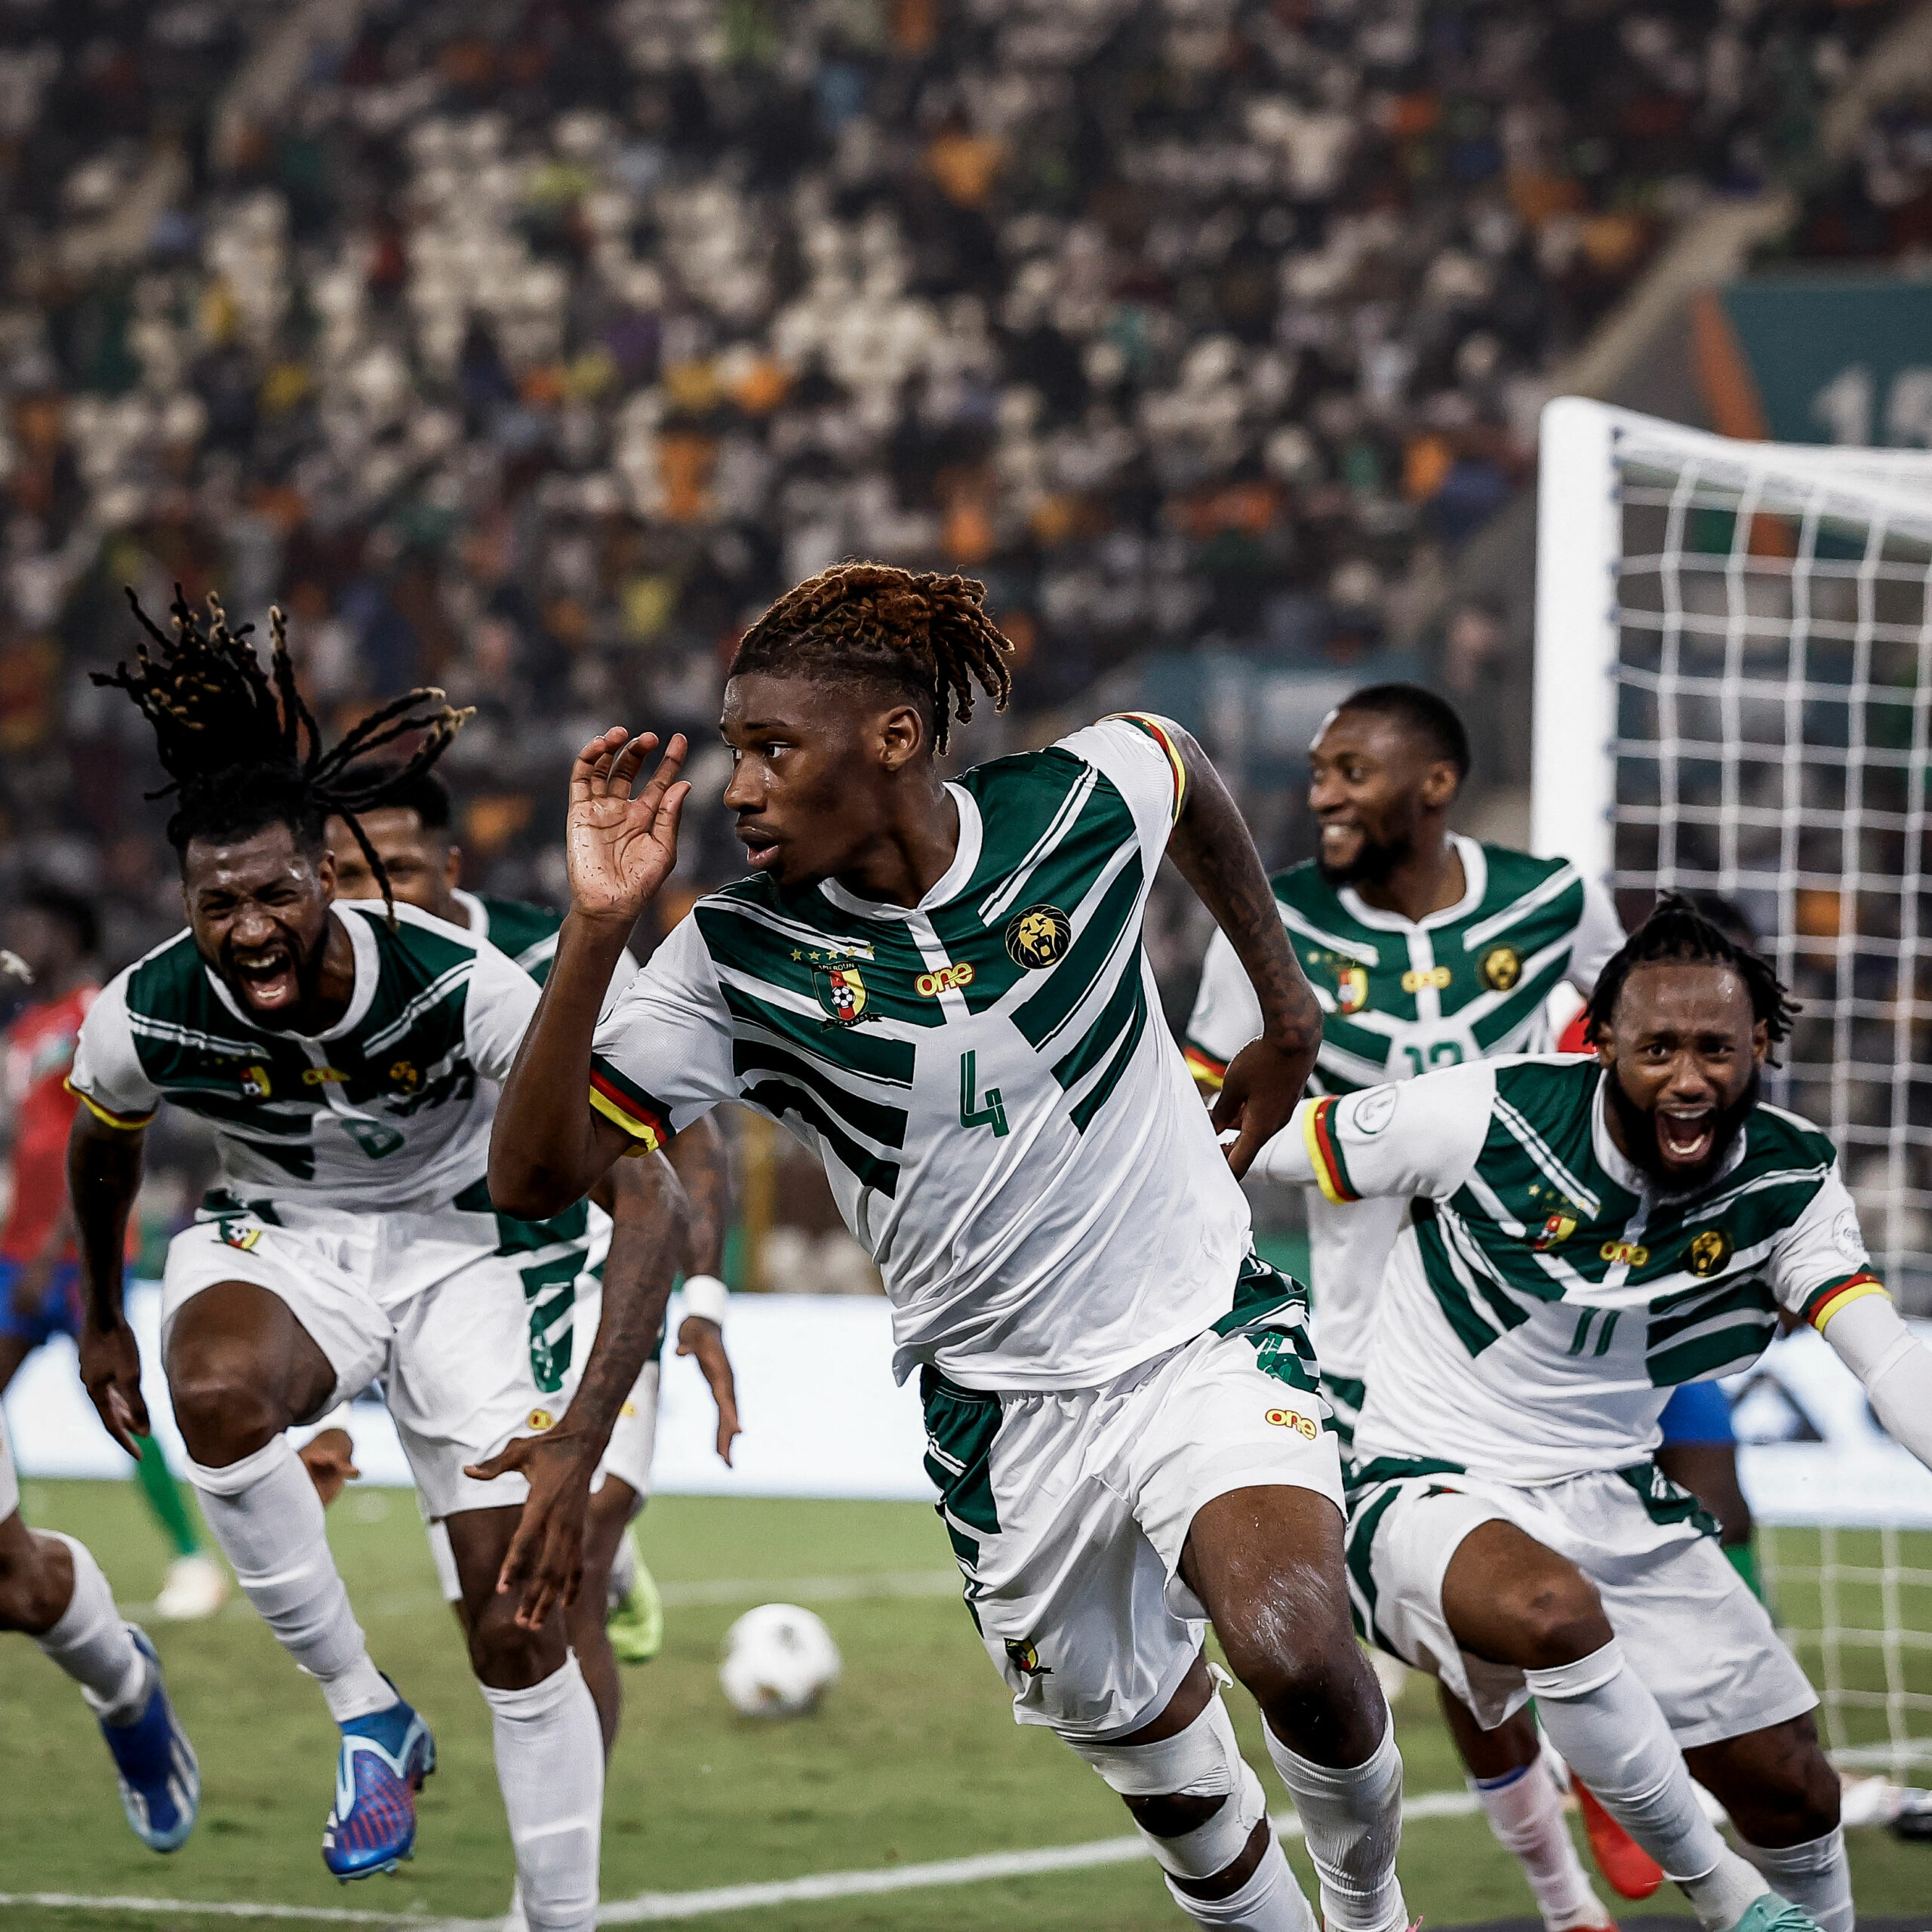 AFCON 2023: Cameroon scale through to set up round 16 tie with Nigeria